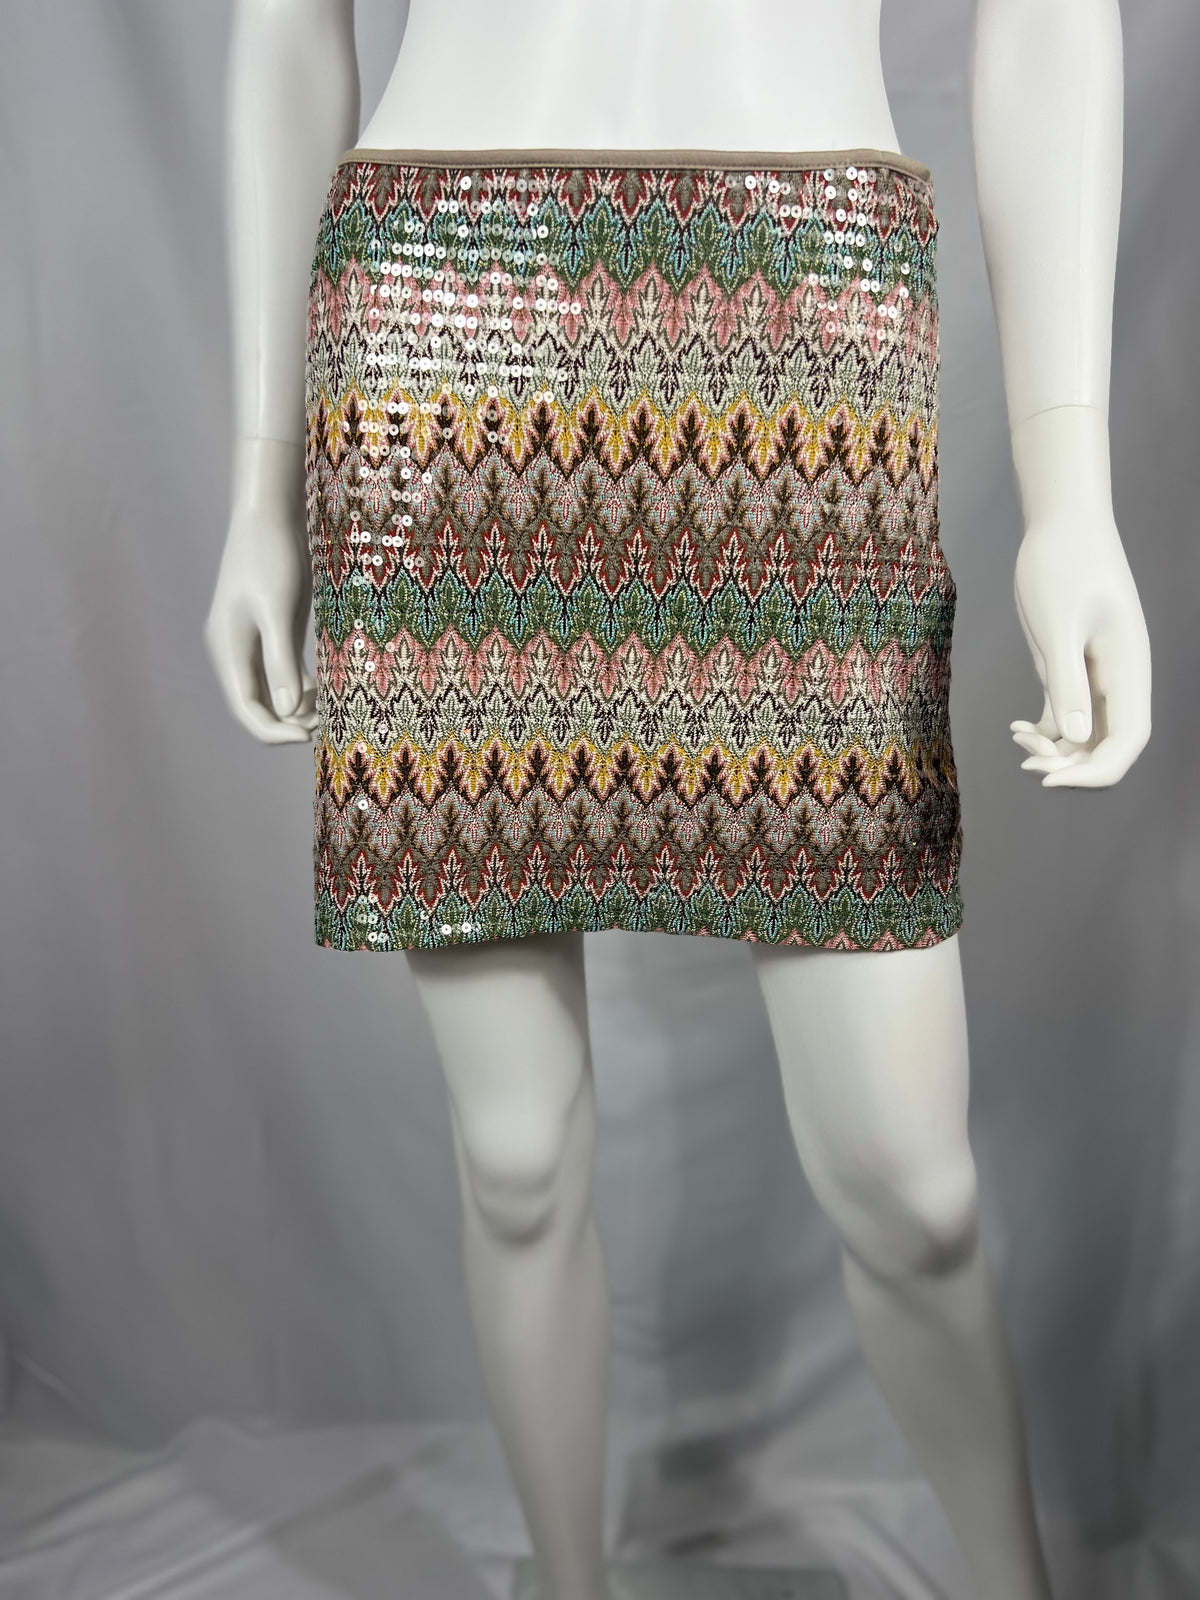 2000's Mossimo Sequin Pattern Skirt